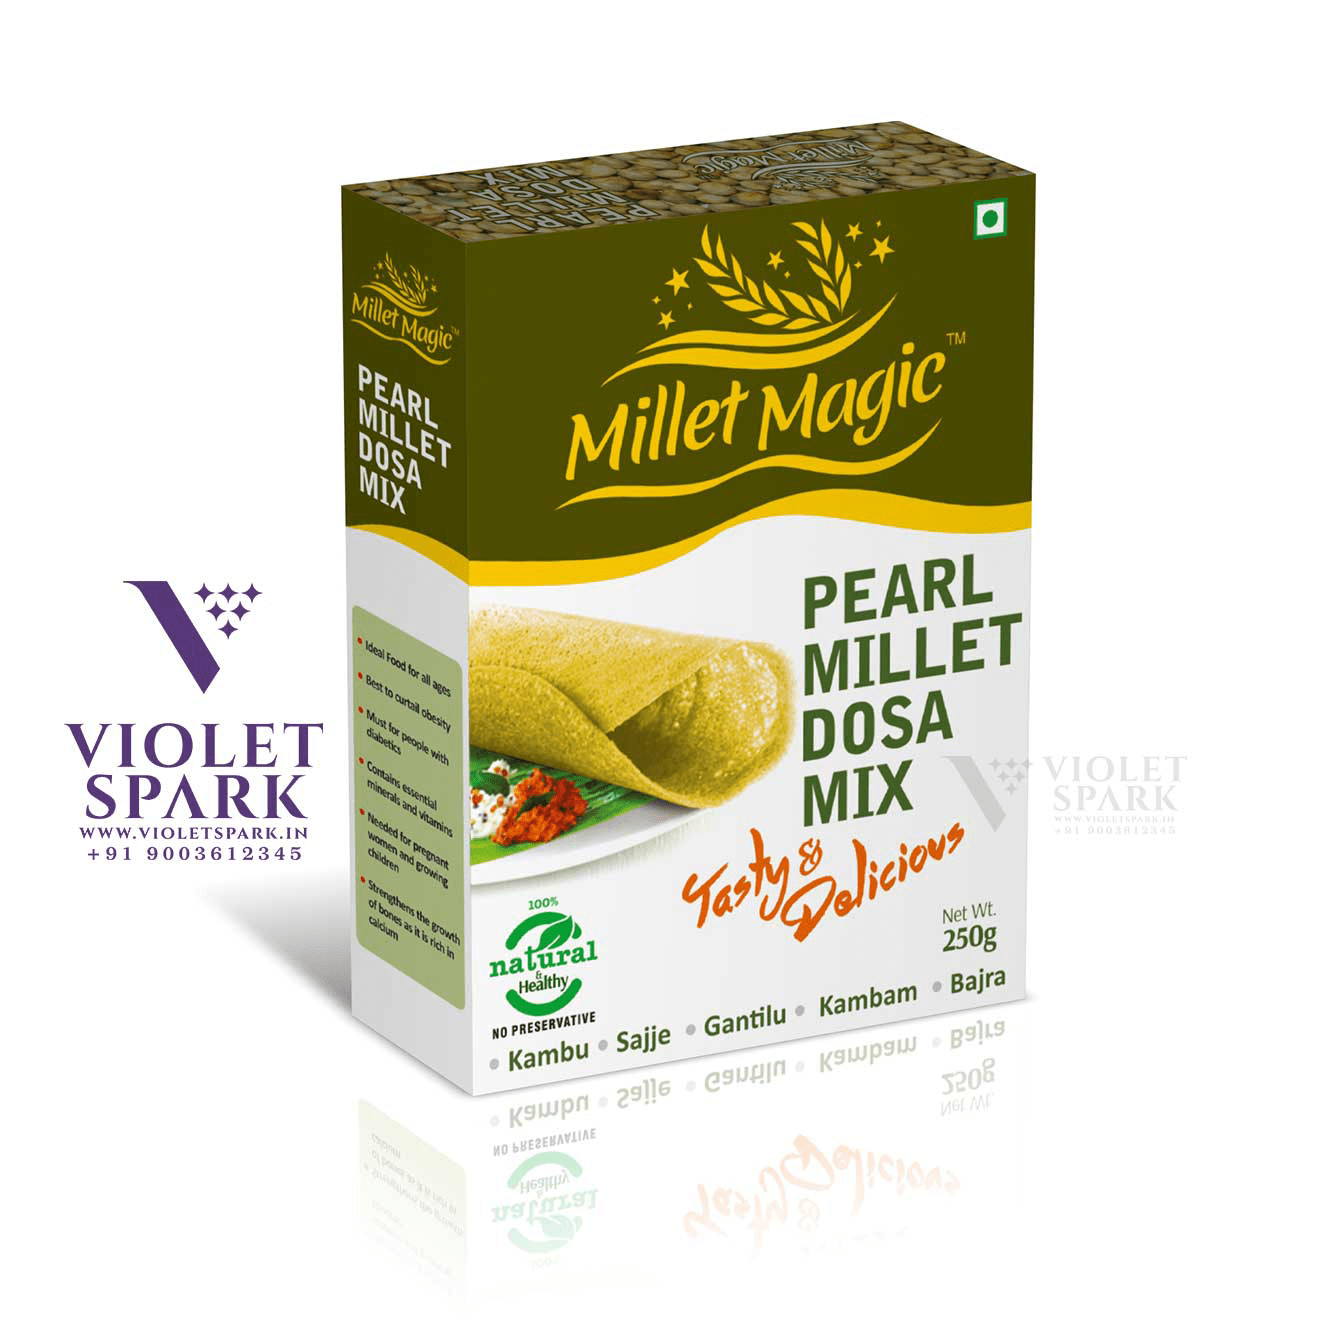 Millet Magic Pearl Millet Dosa Mix Graphic Design, Branding Packaging Design in Salem by Creative Prints thecreativeprints